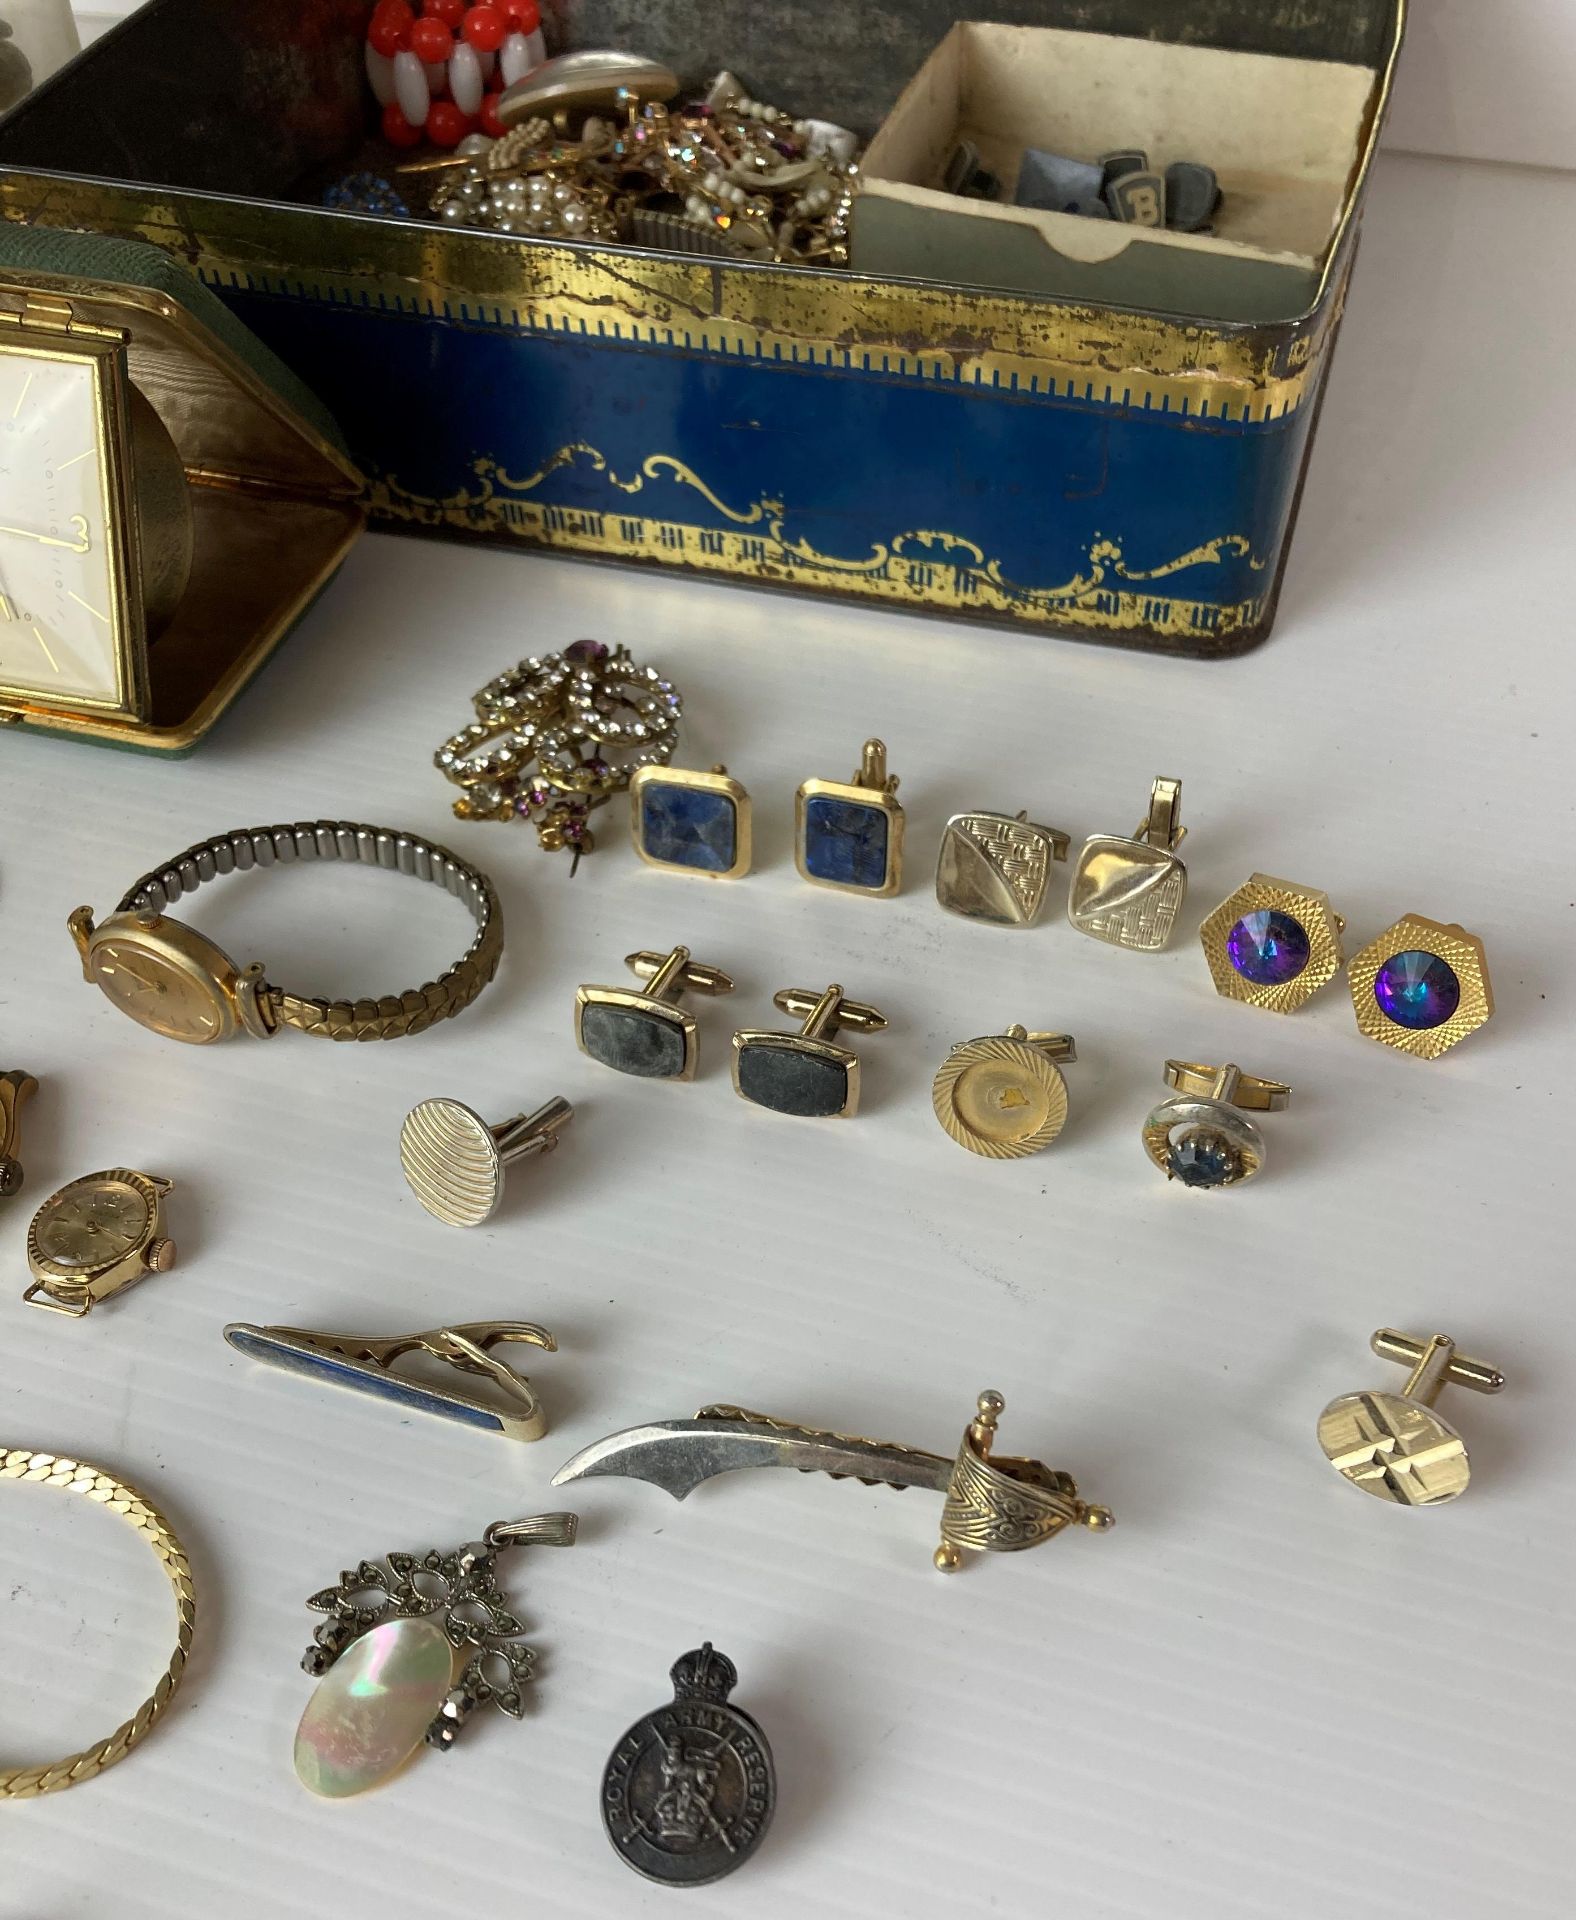 Contents to tin - assorted costume jewellery and watches, brooches, cufflinks, - Image 2 of 7